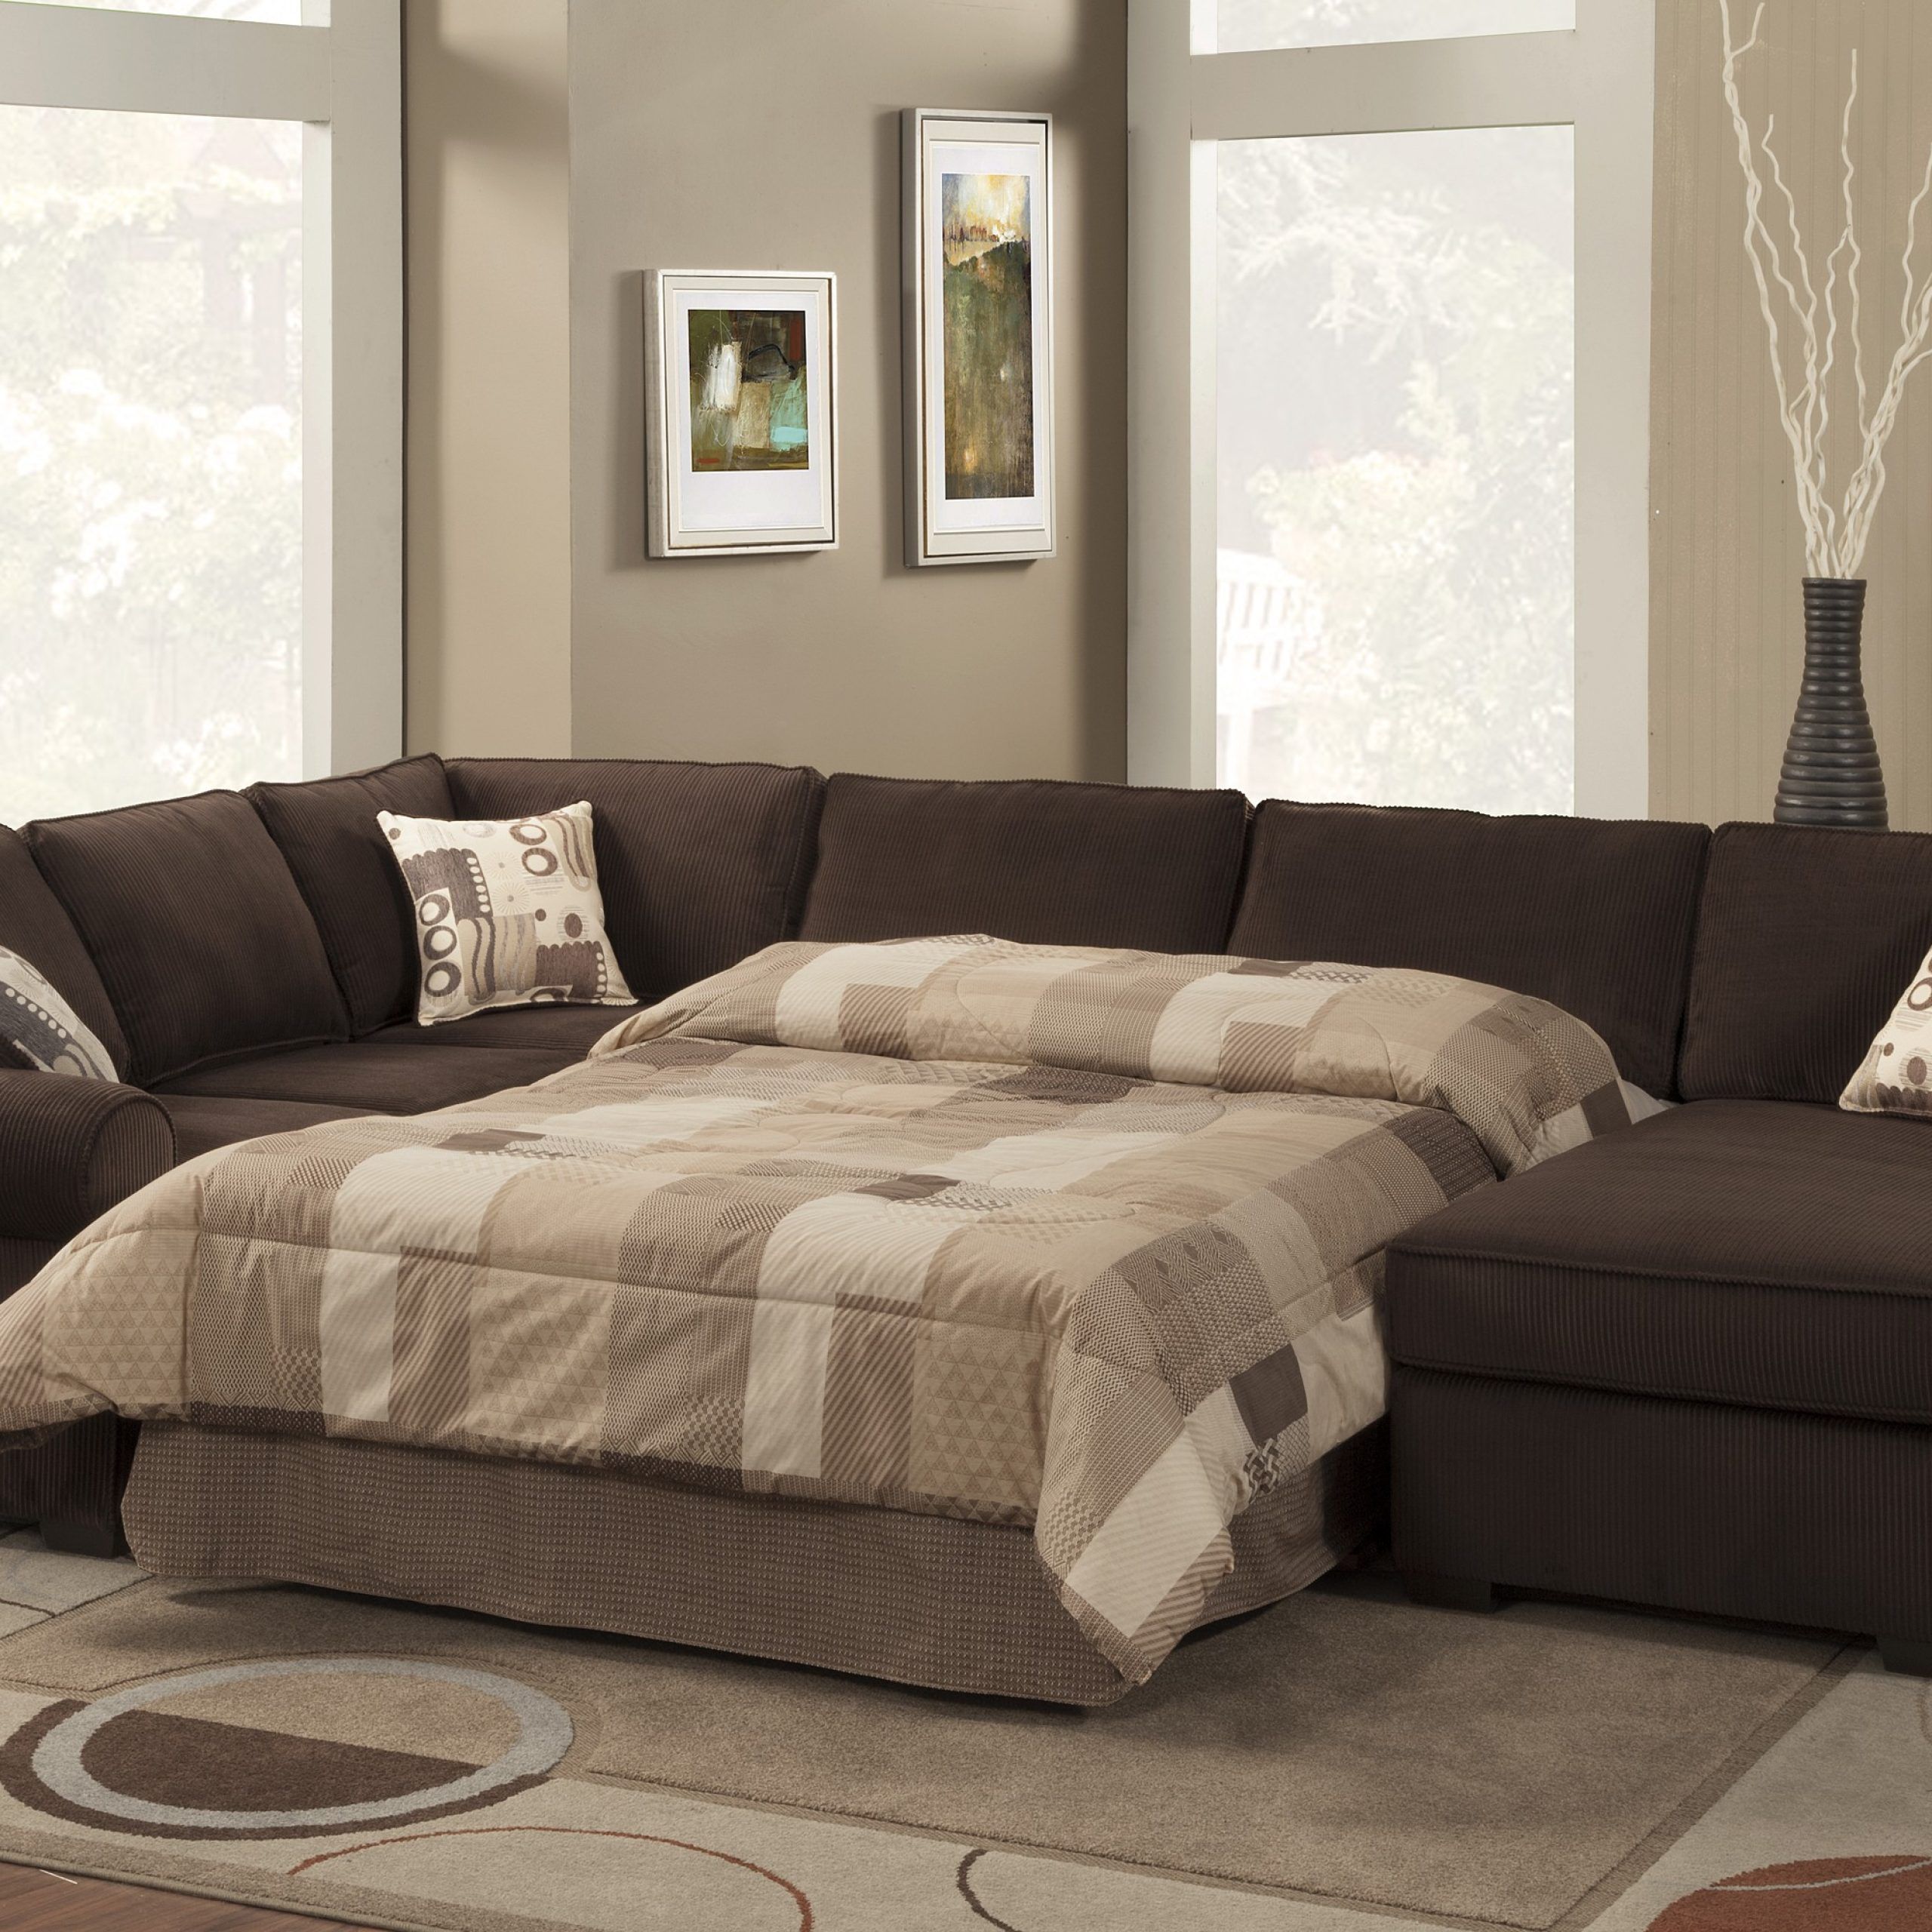 Sectional Sofa Sleepers For Better Sleep Quality And Comfort – Homesfeed With Left Or Right Facing Sleeper Sectionals (View 15 of 21)